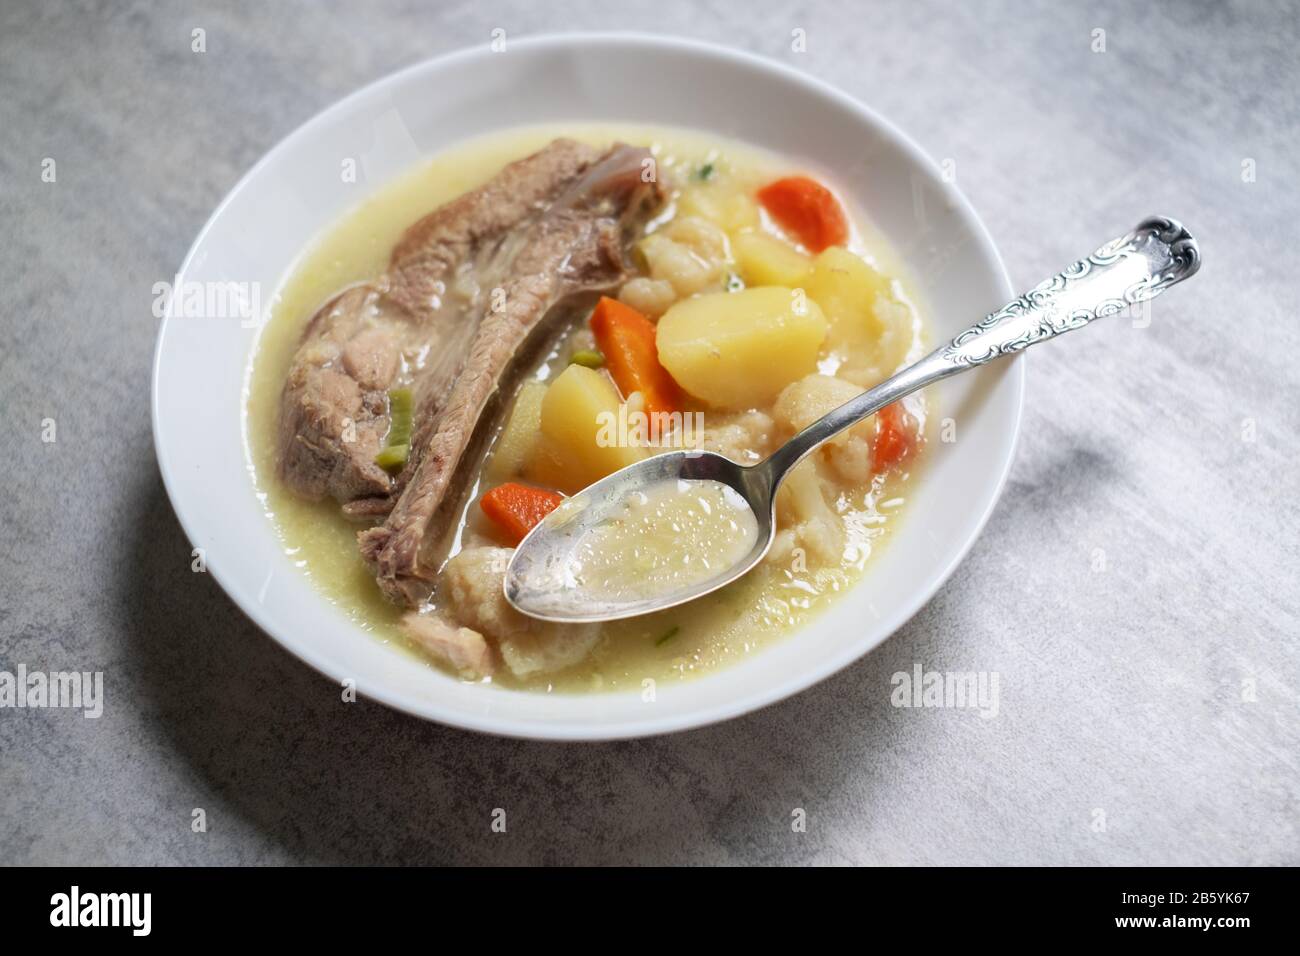 Soup with potato and pork rib meat. Food photography Stock Photo